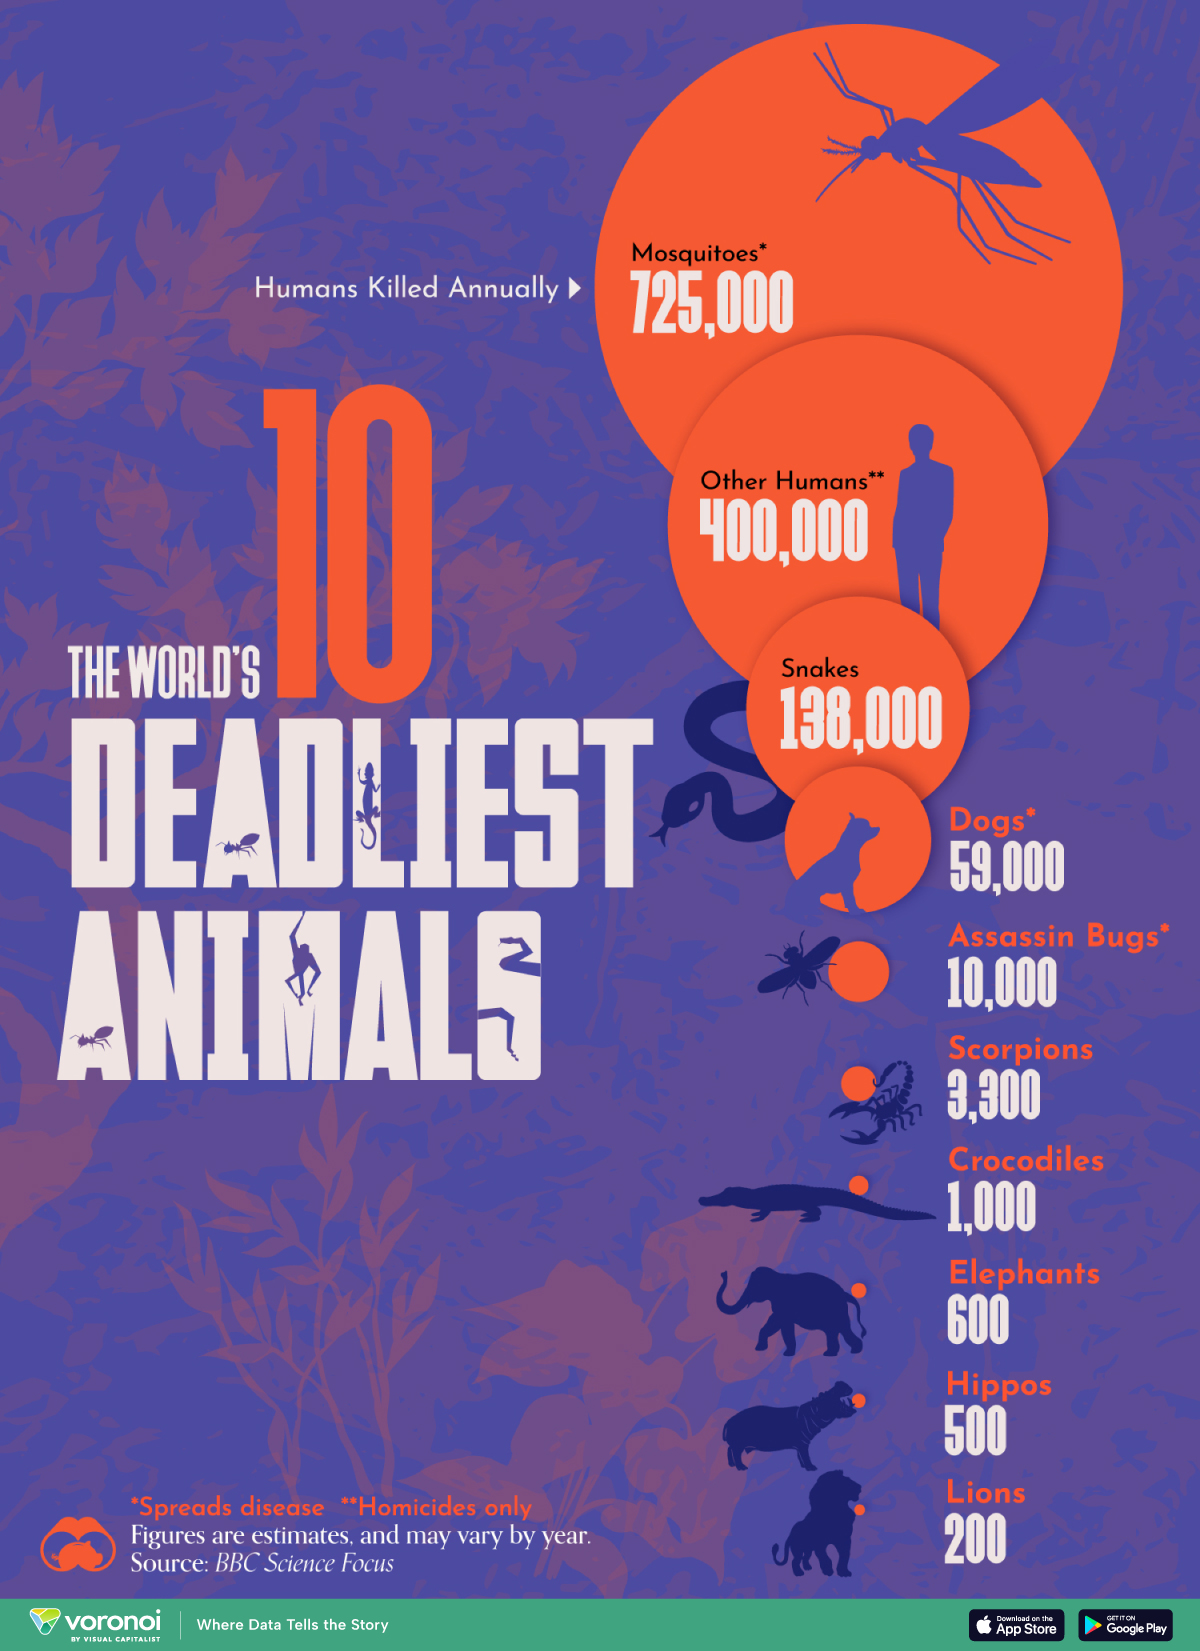 A chart ranking the top 10 deadliest animals by the number of people killed per year.